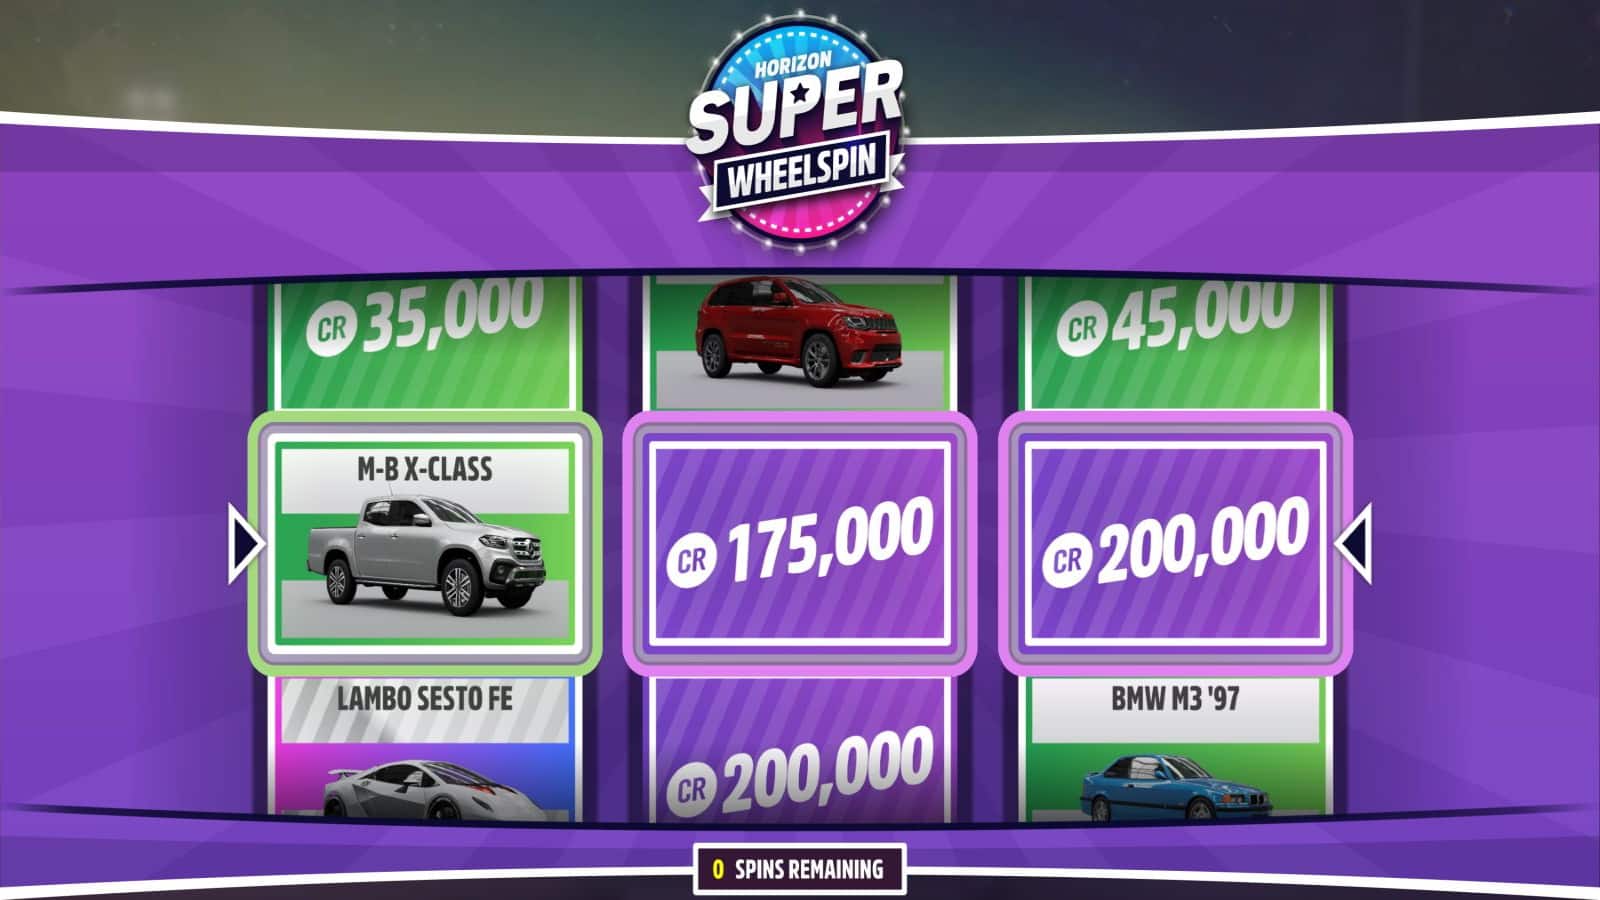 The Forza Horizon Super Wheelspin menu allows players a chance for some free gear